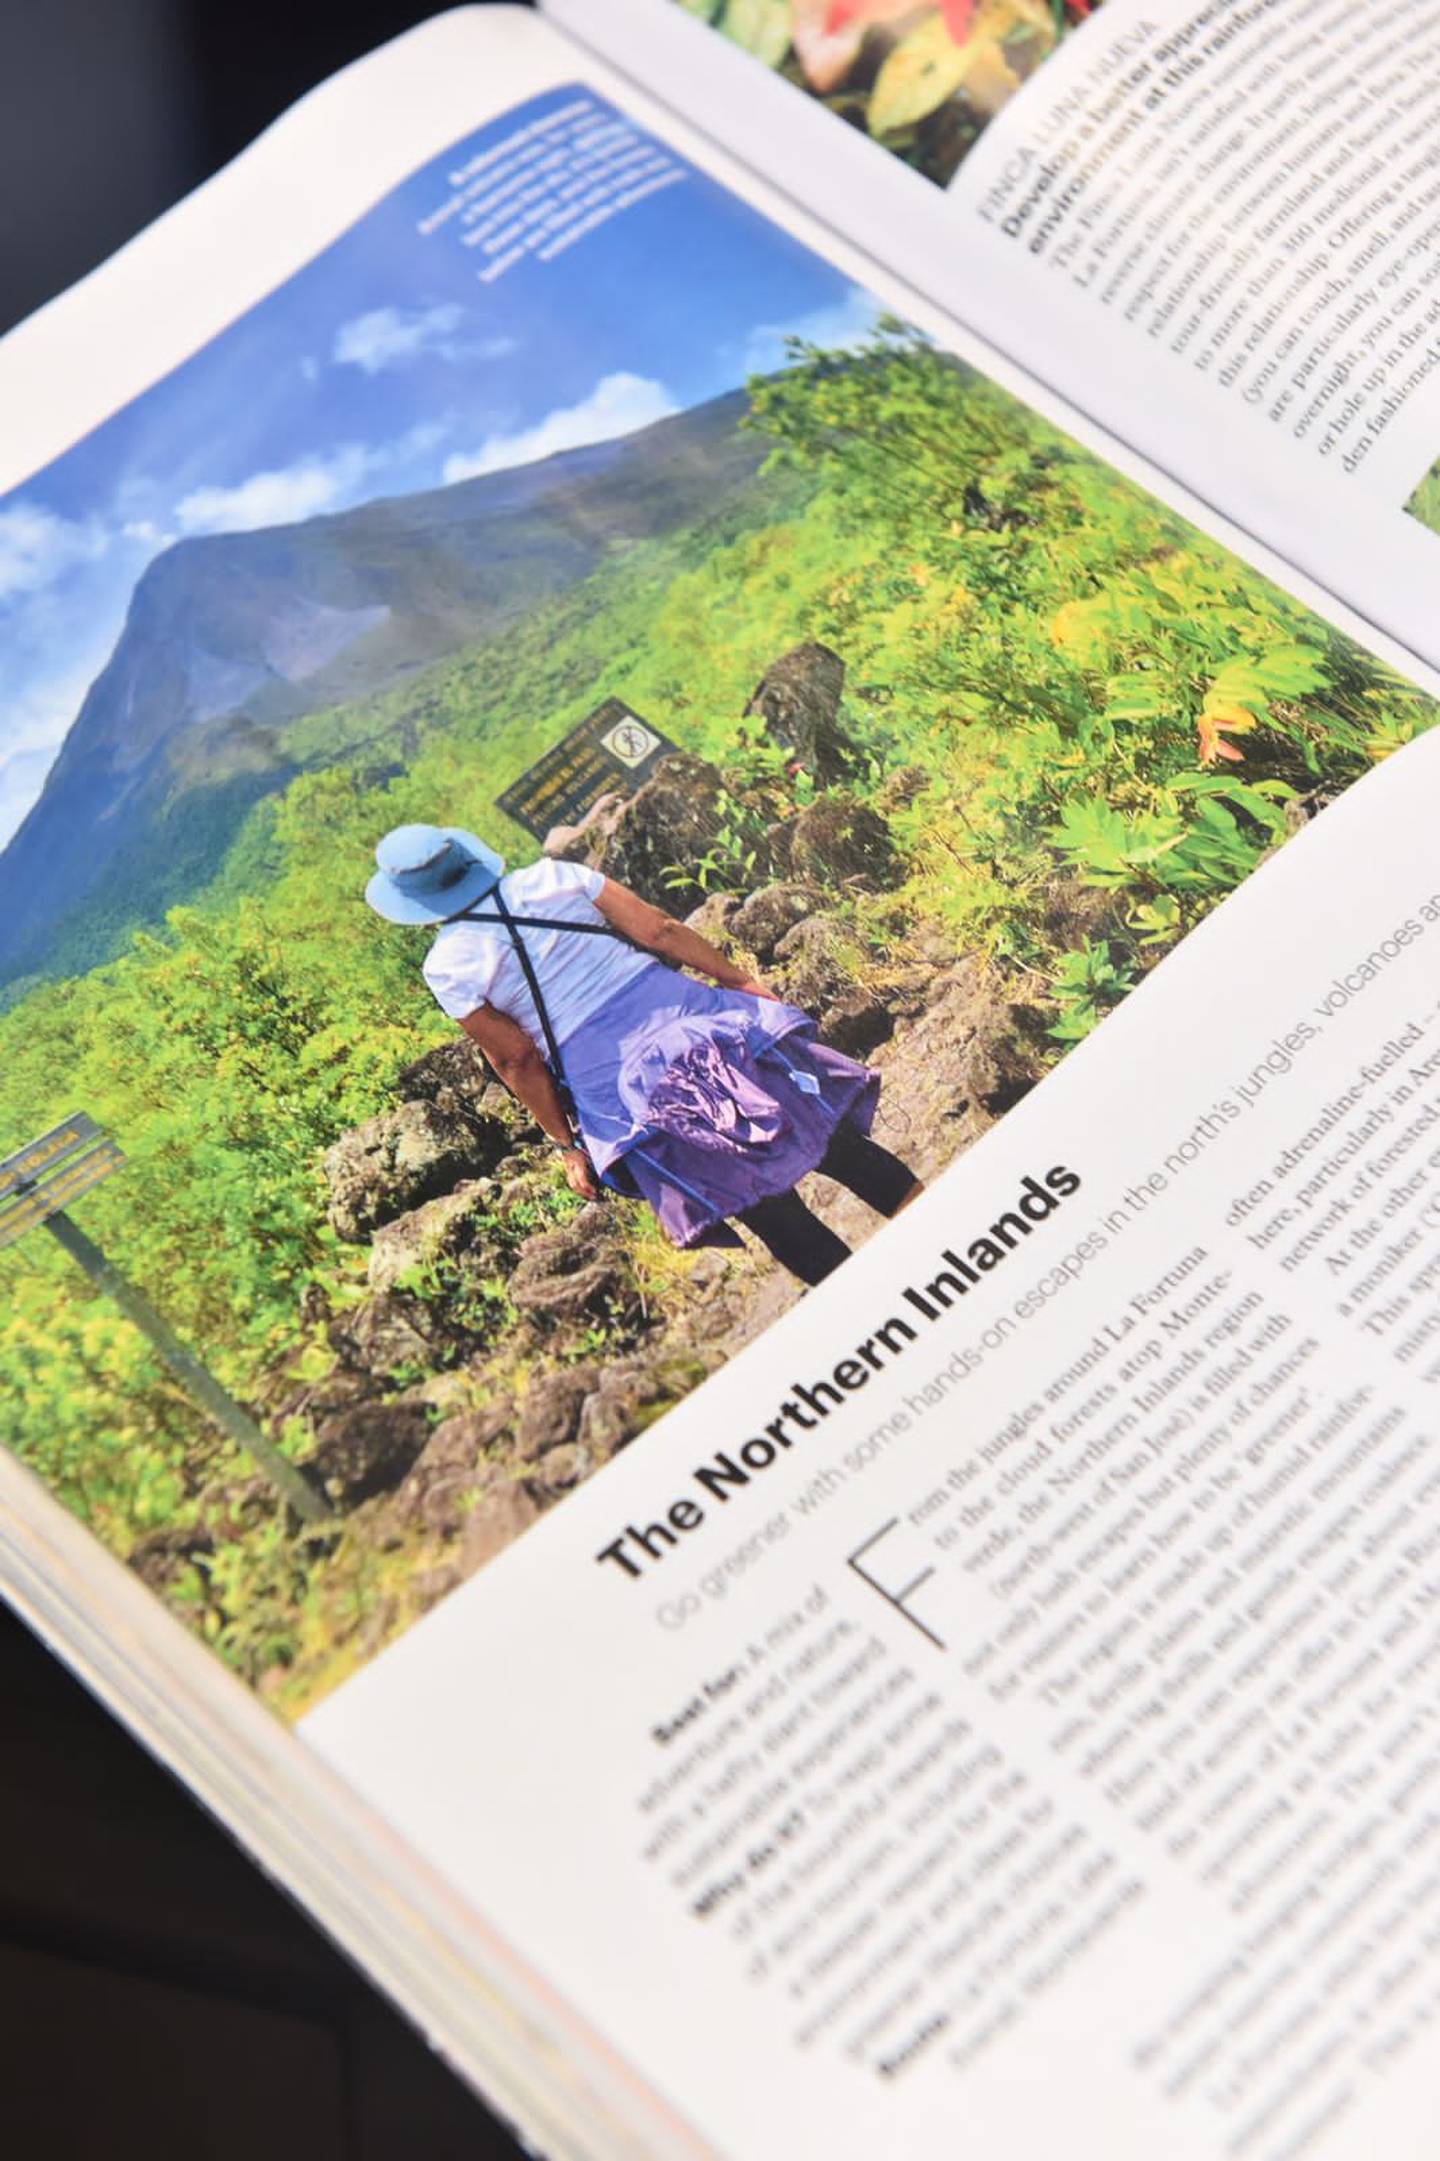 Says this important British magazine about Costa Rica